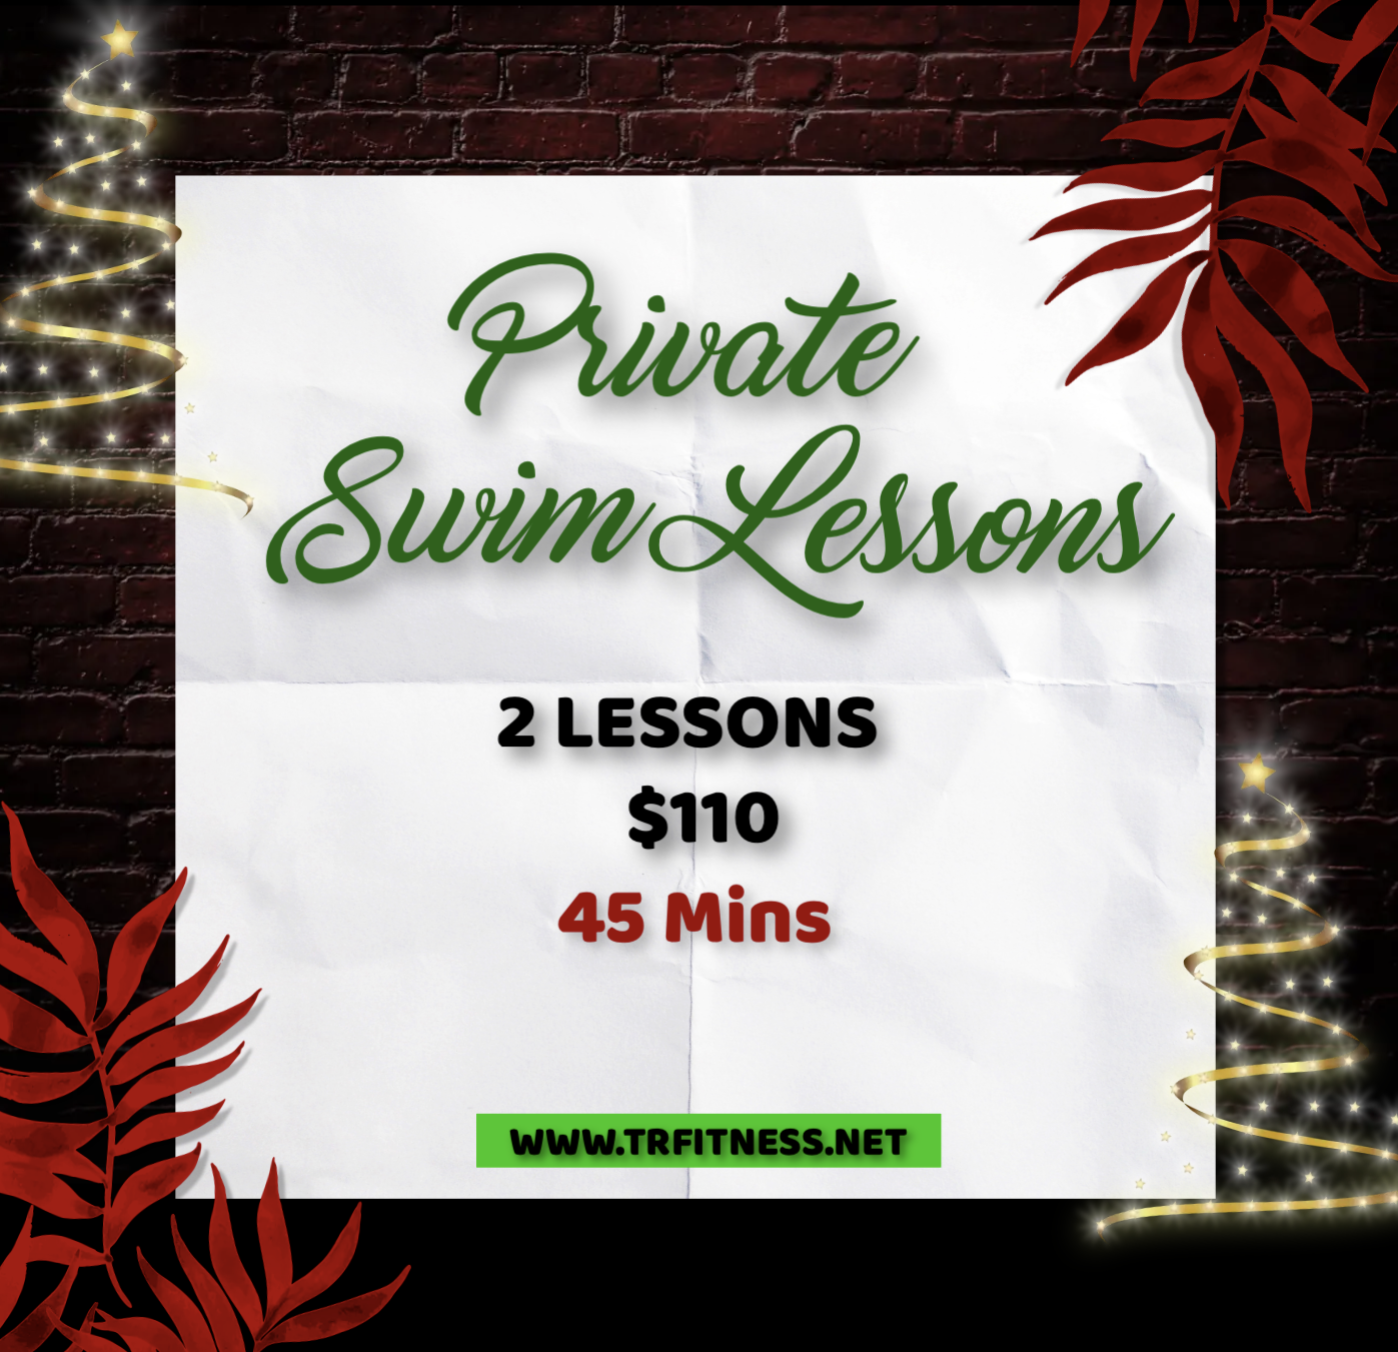 CHRISTMAS IN JULY - PRIVATE SWIM